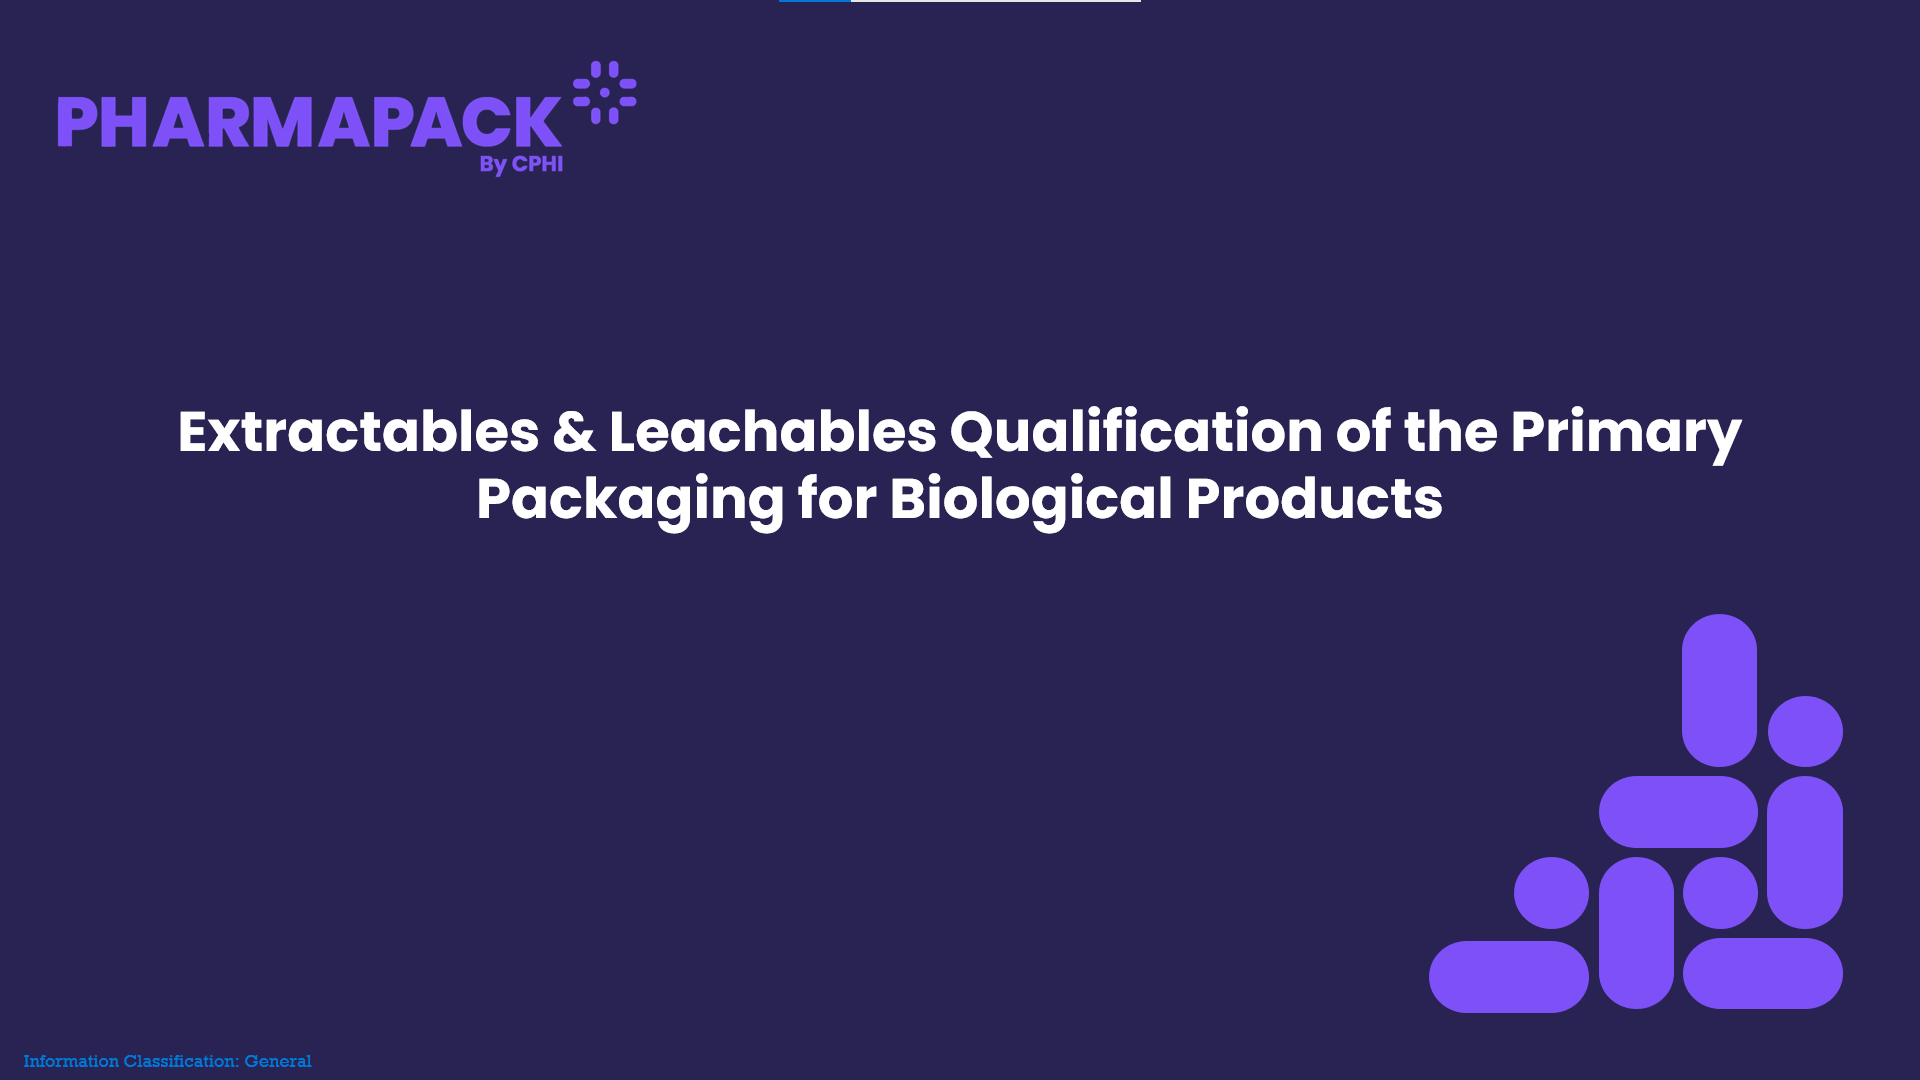 Extractables & Leachables Qualification of the Primary packaging for Biological Products